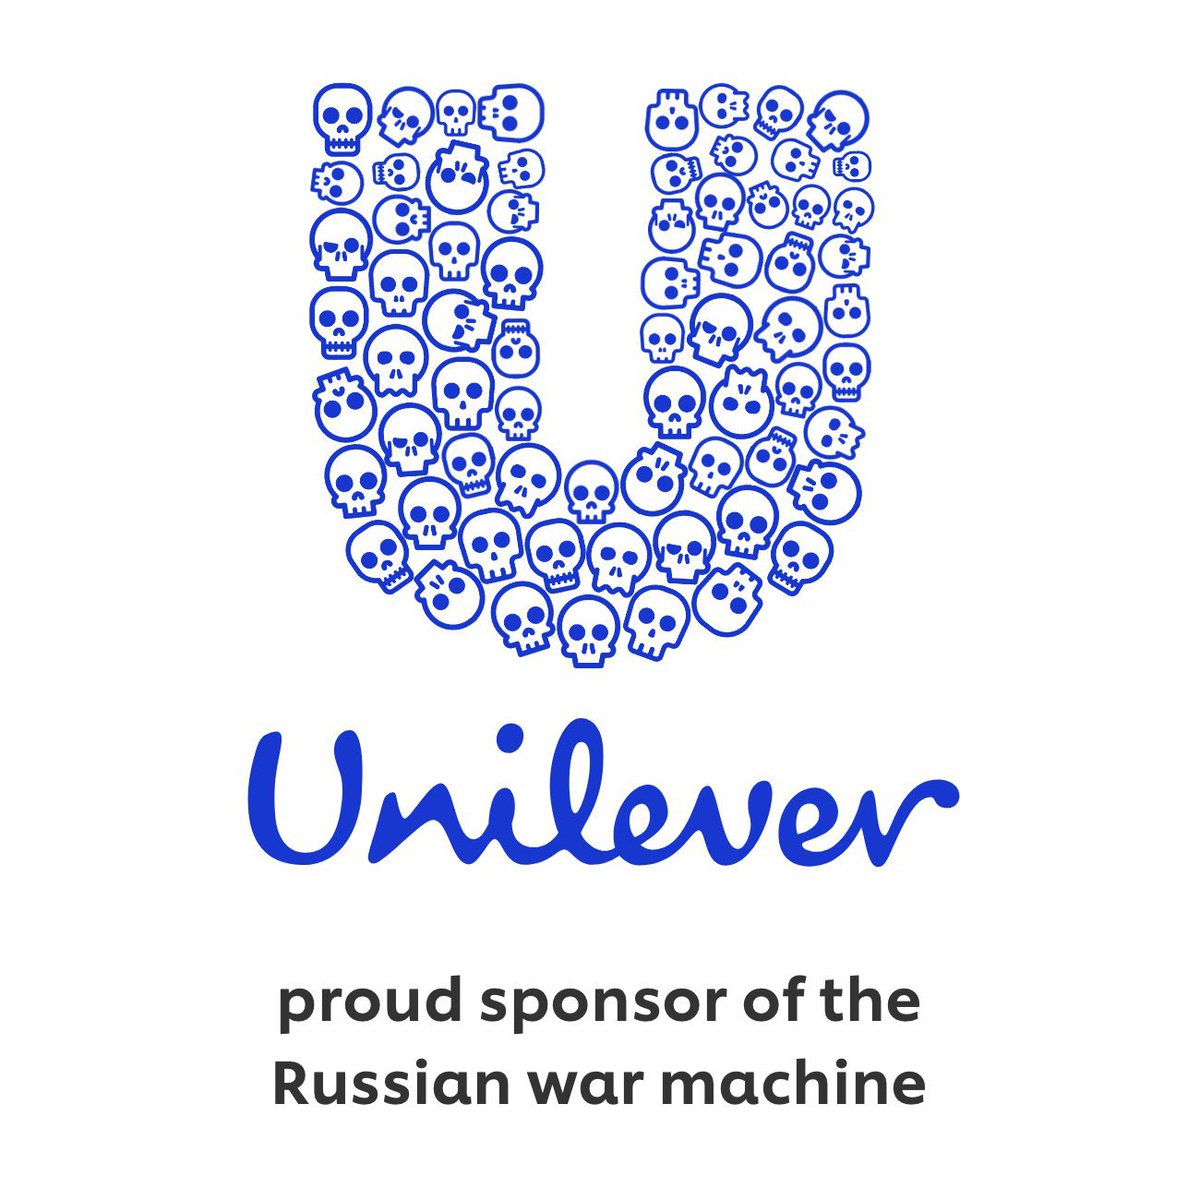 @Unilever Improving living standards as in Ukraine where people are bombed because of your tax money for Ruzzia? You are a joke #boycottunilever